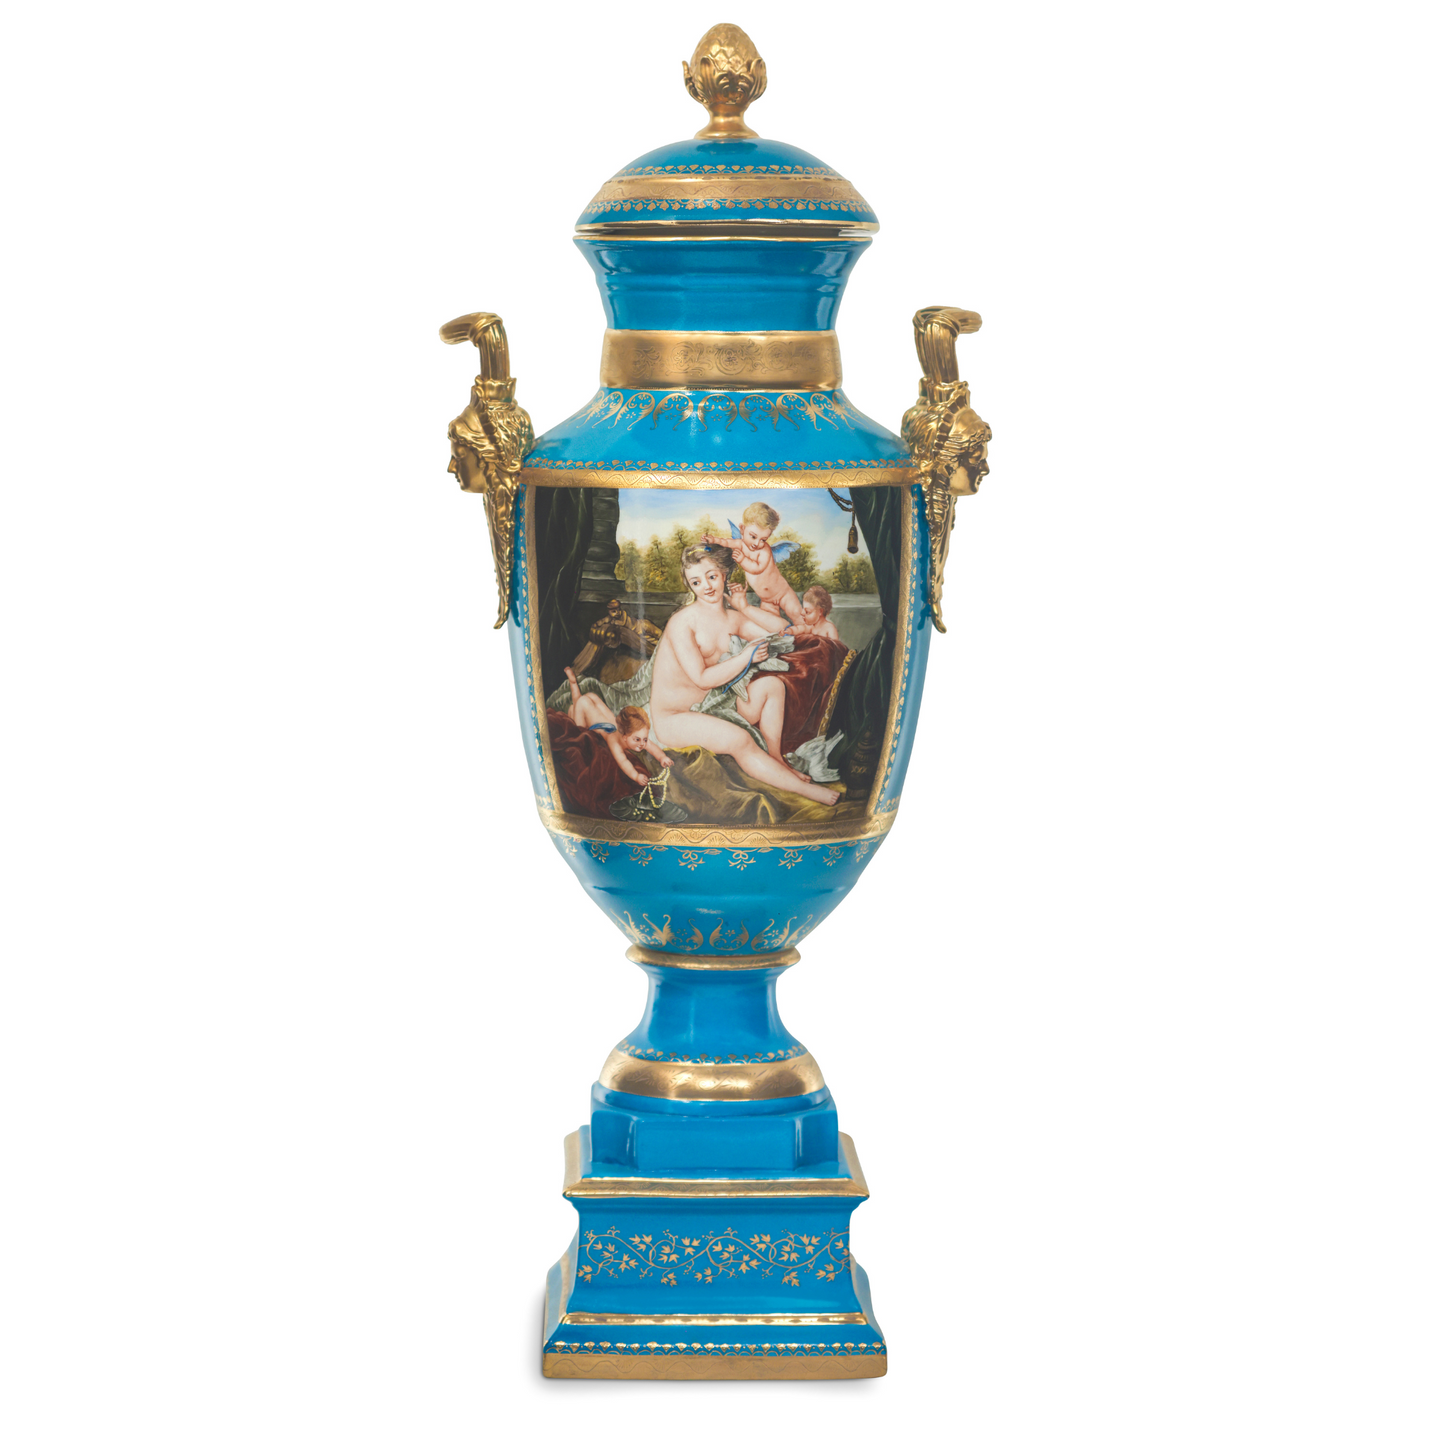 Hand-painted French Style Porcelain Urn with Baroque Floral Motif